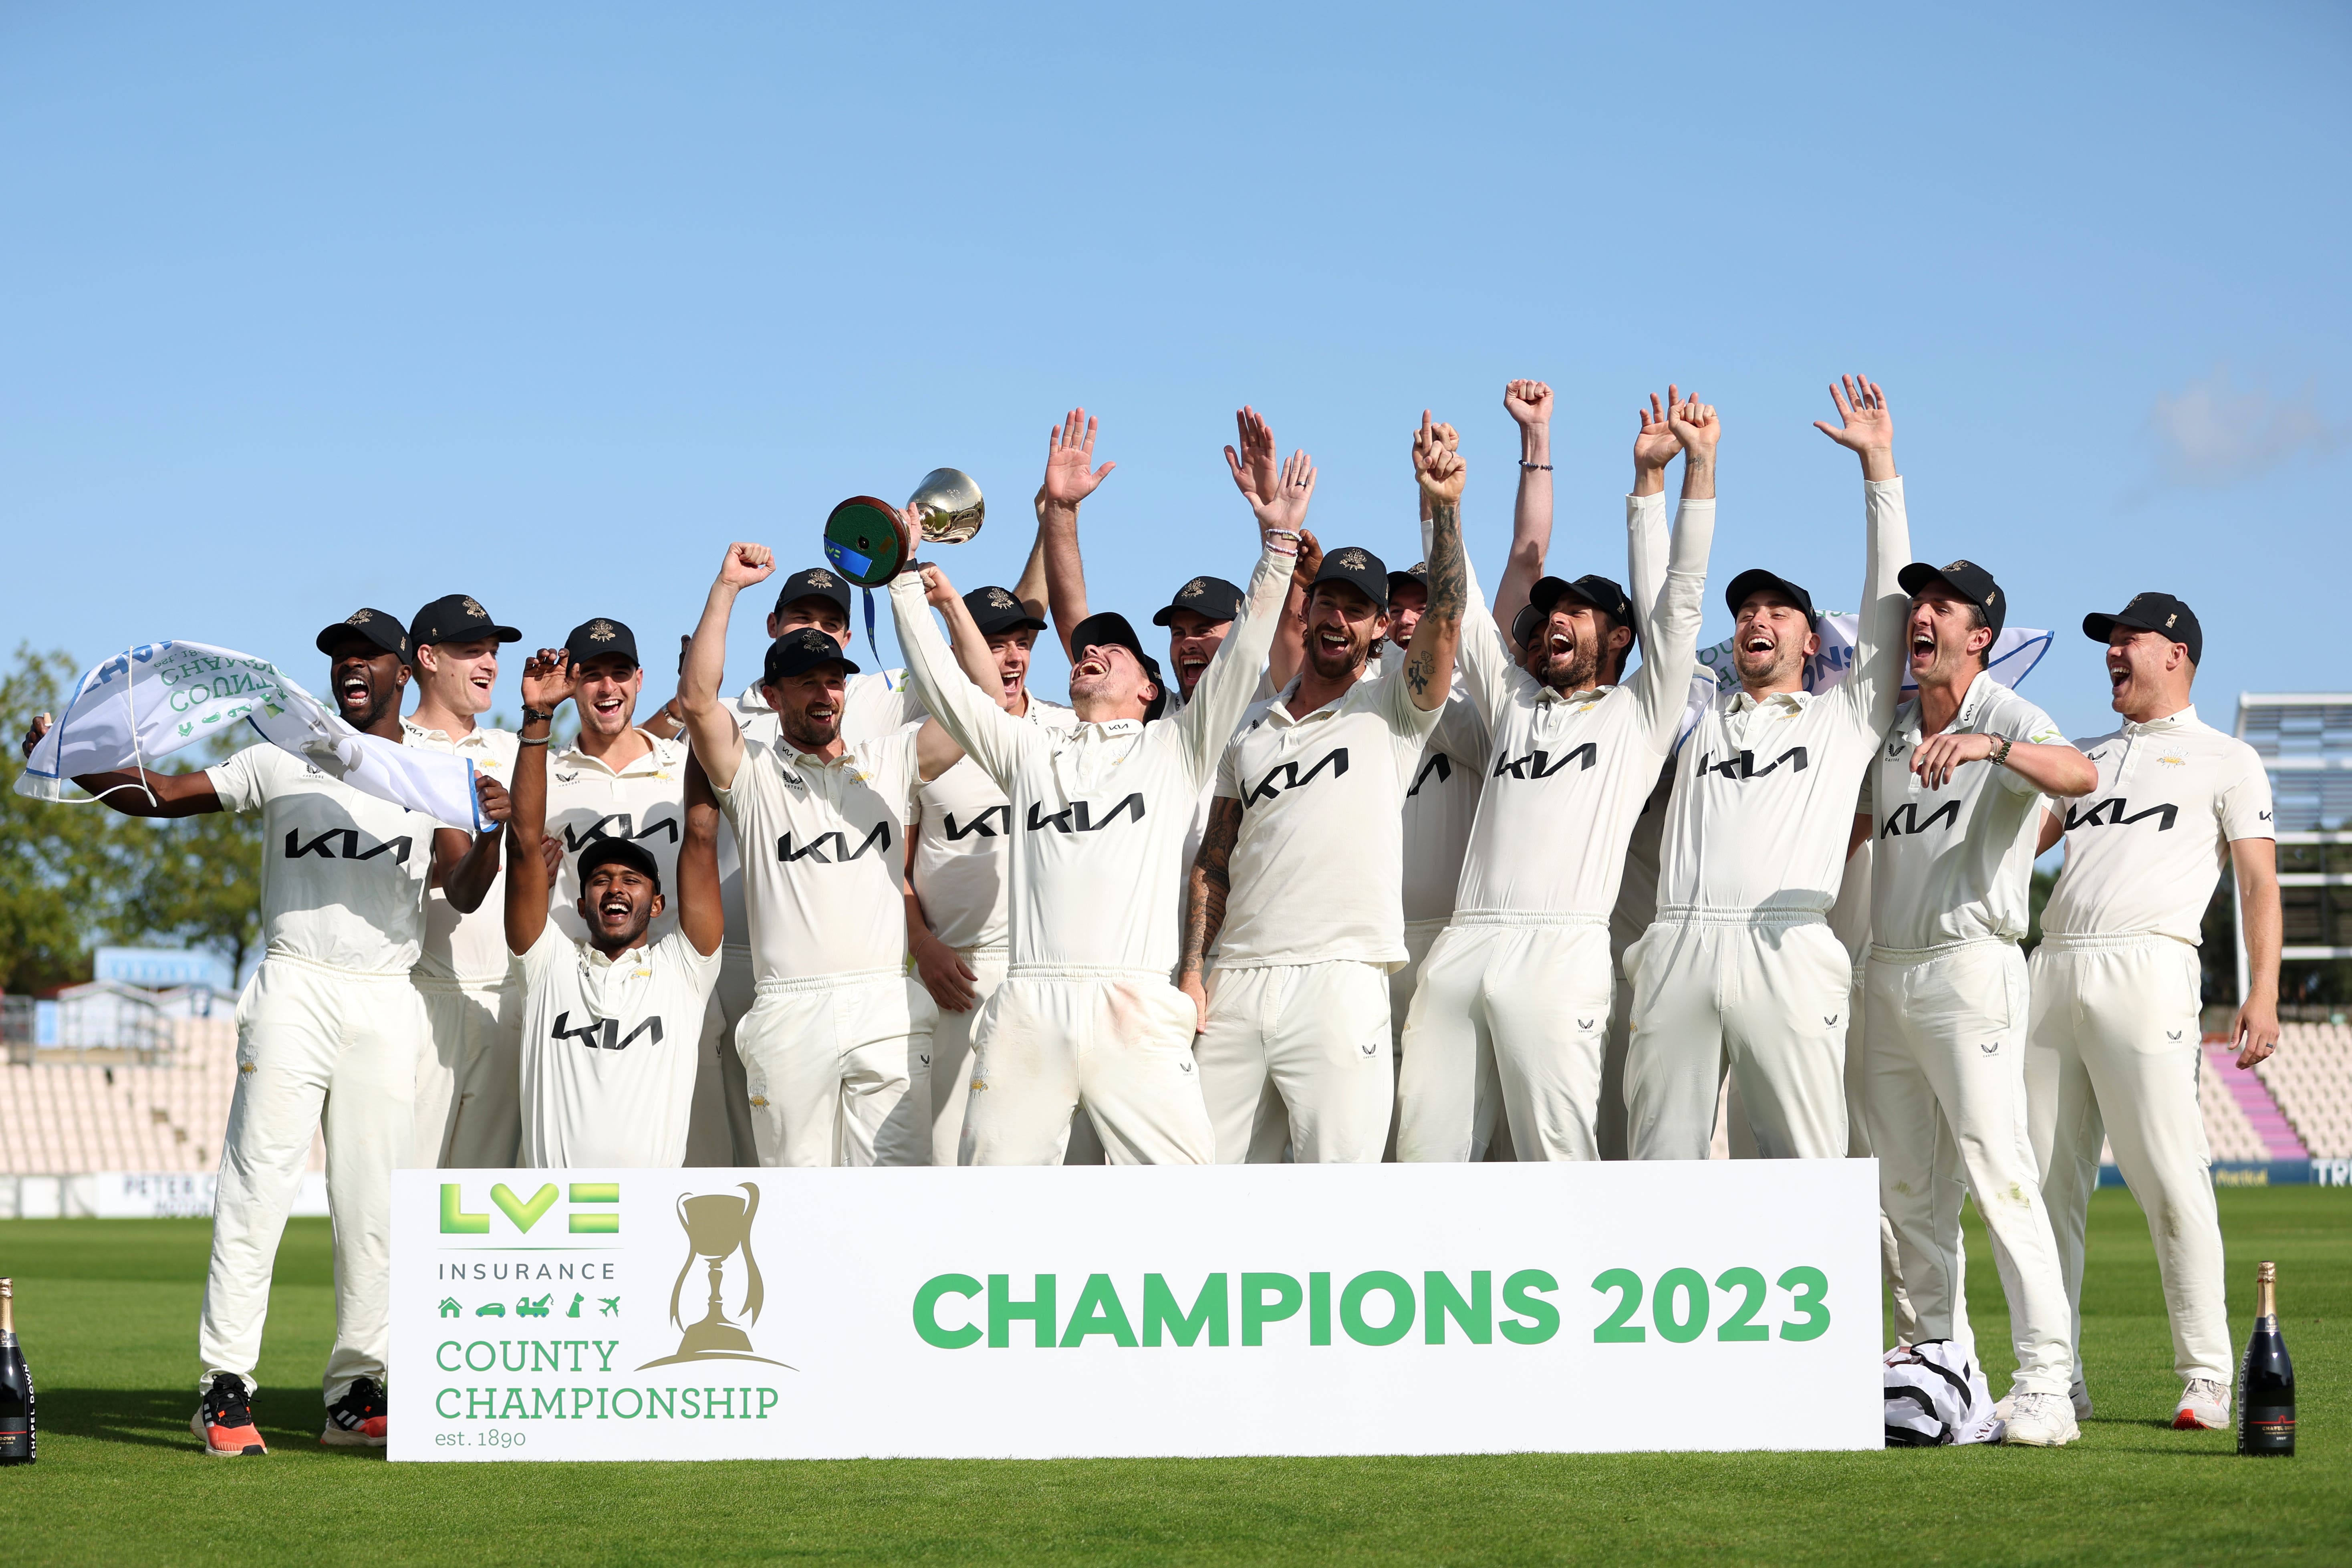 Surrey will open the defence of their County Championship title away to Lancashire in April